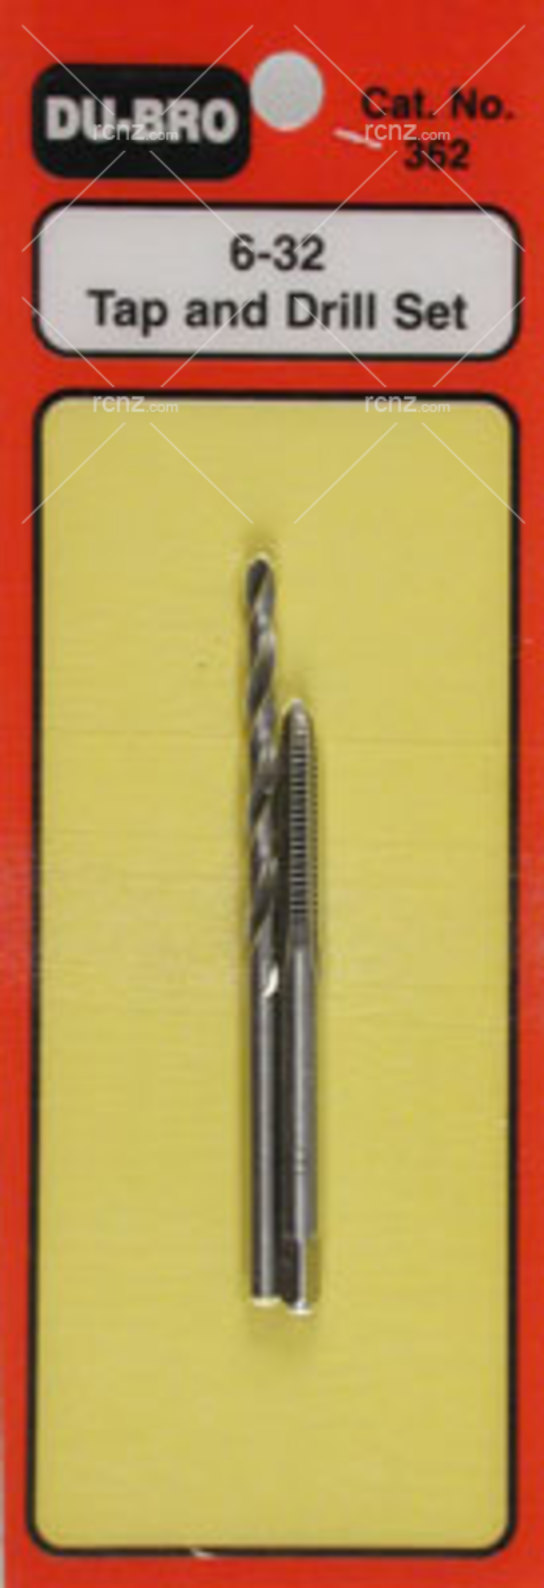 Dubro - 6-32 Tap & Drill Set image